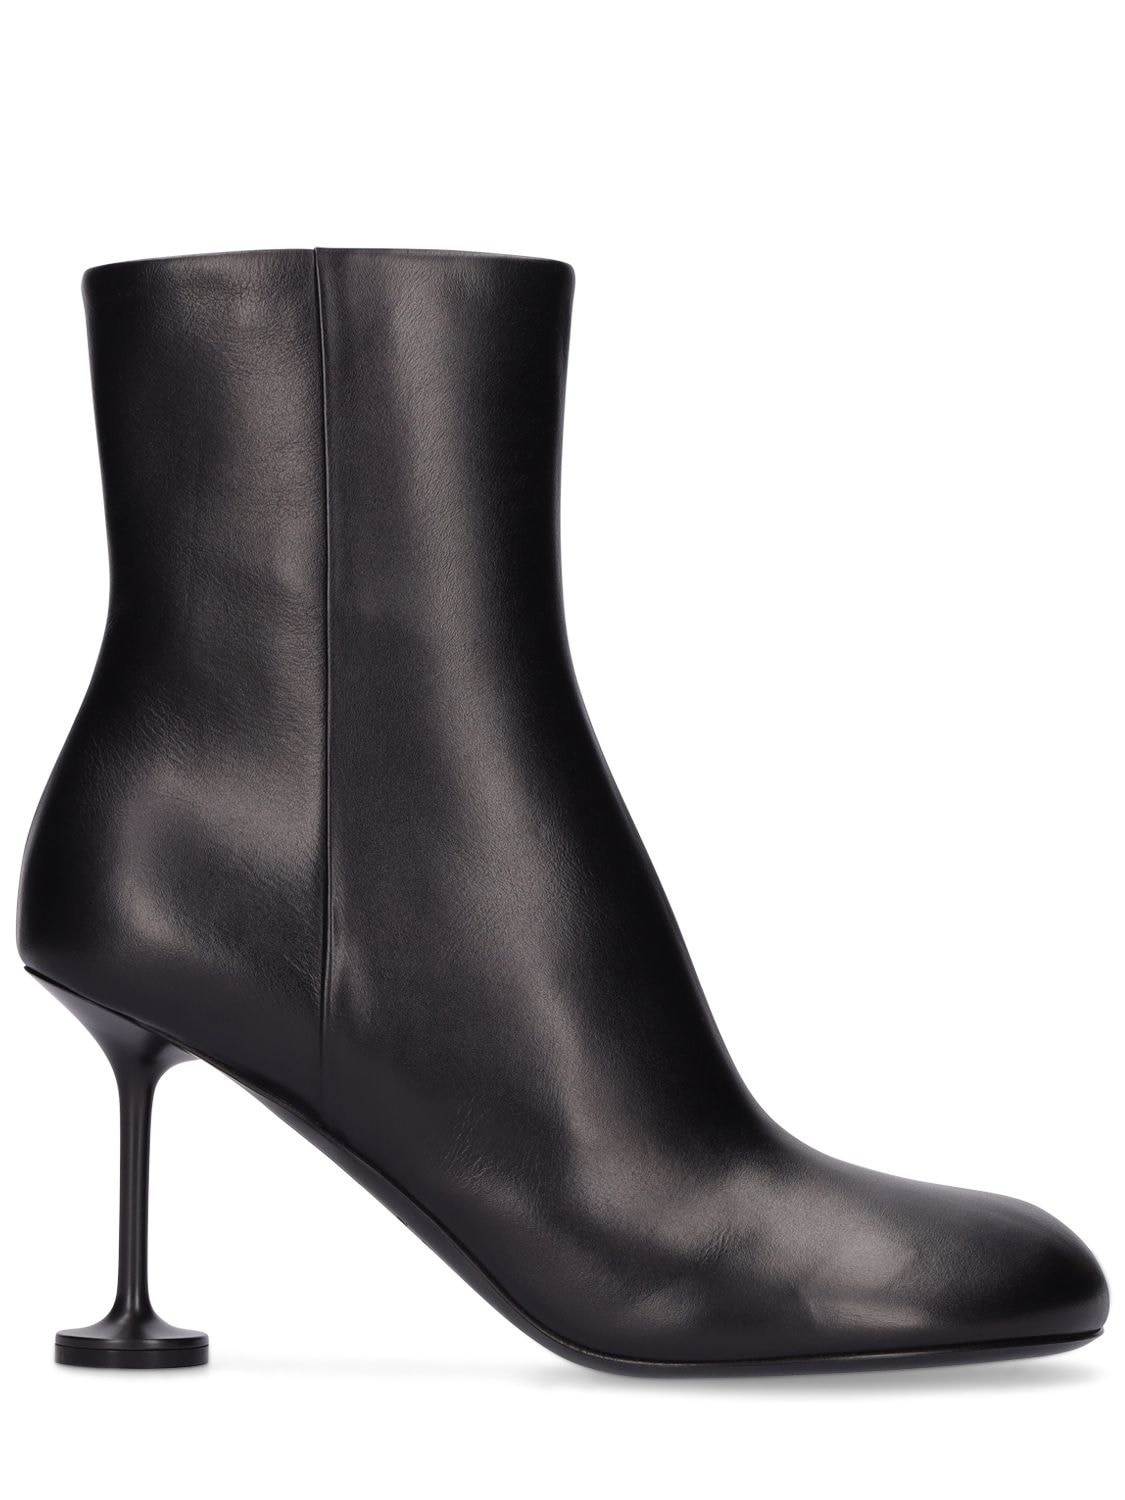 Balenciaga 90mm Lady Leather Ankle Boots In Black